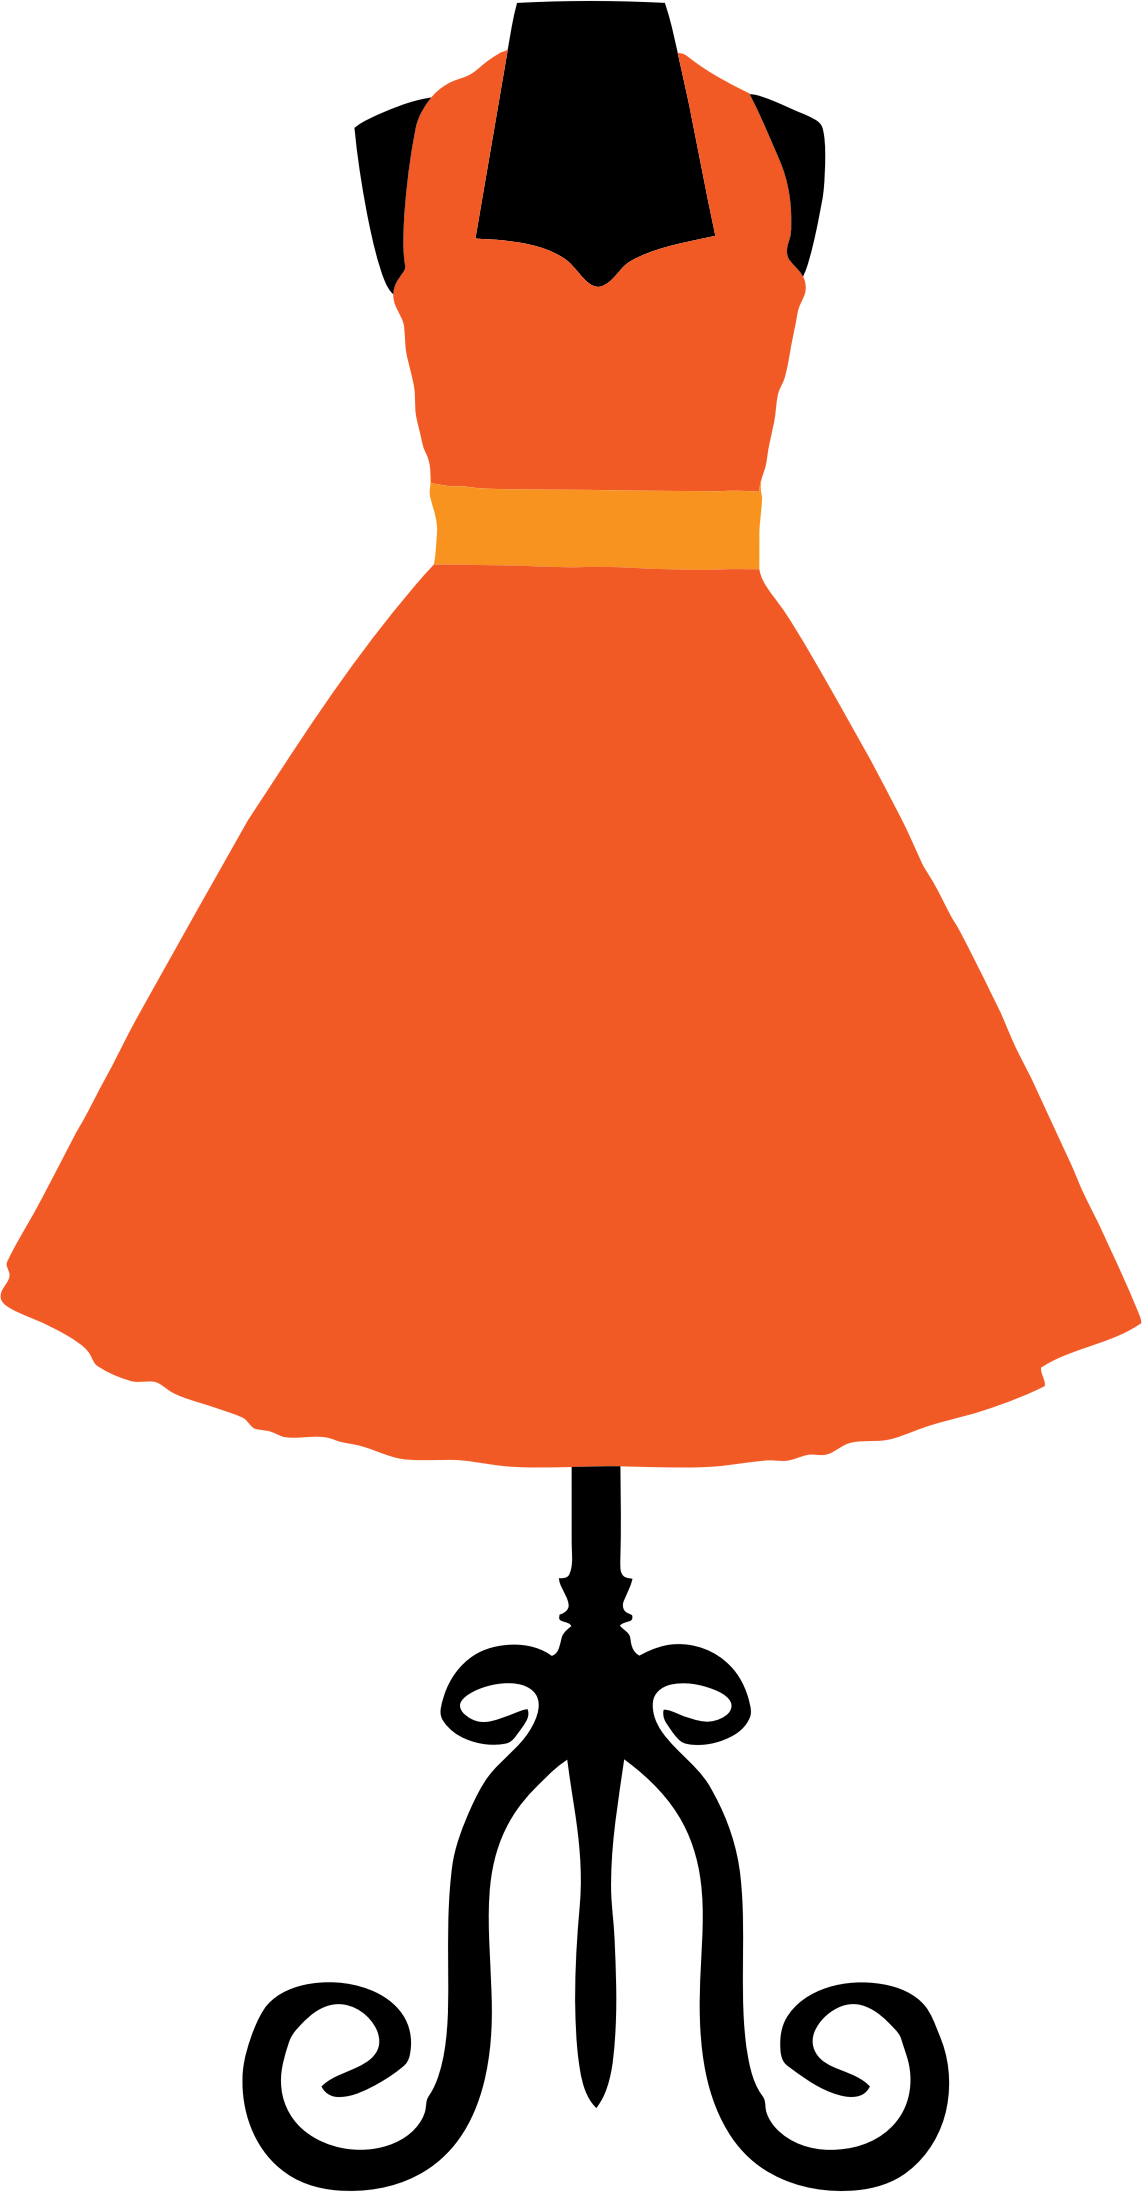 This Free Icons Png Design Of 1950's Vintage Dress - Dress Vintage Png (1142x2192)